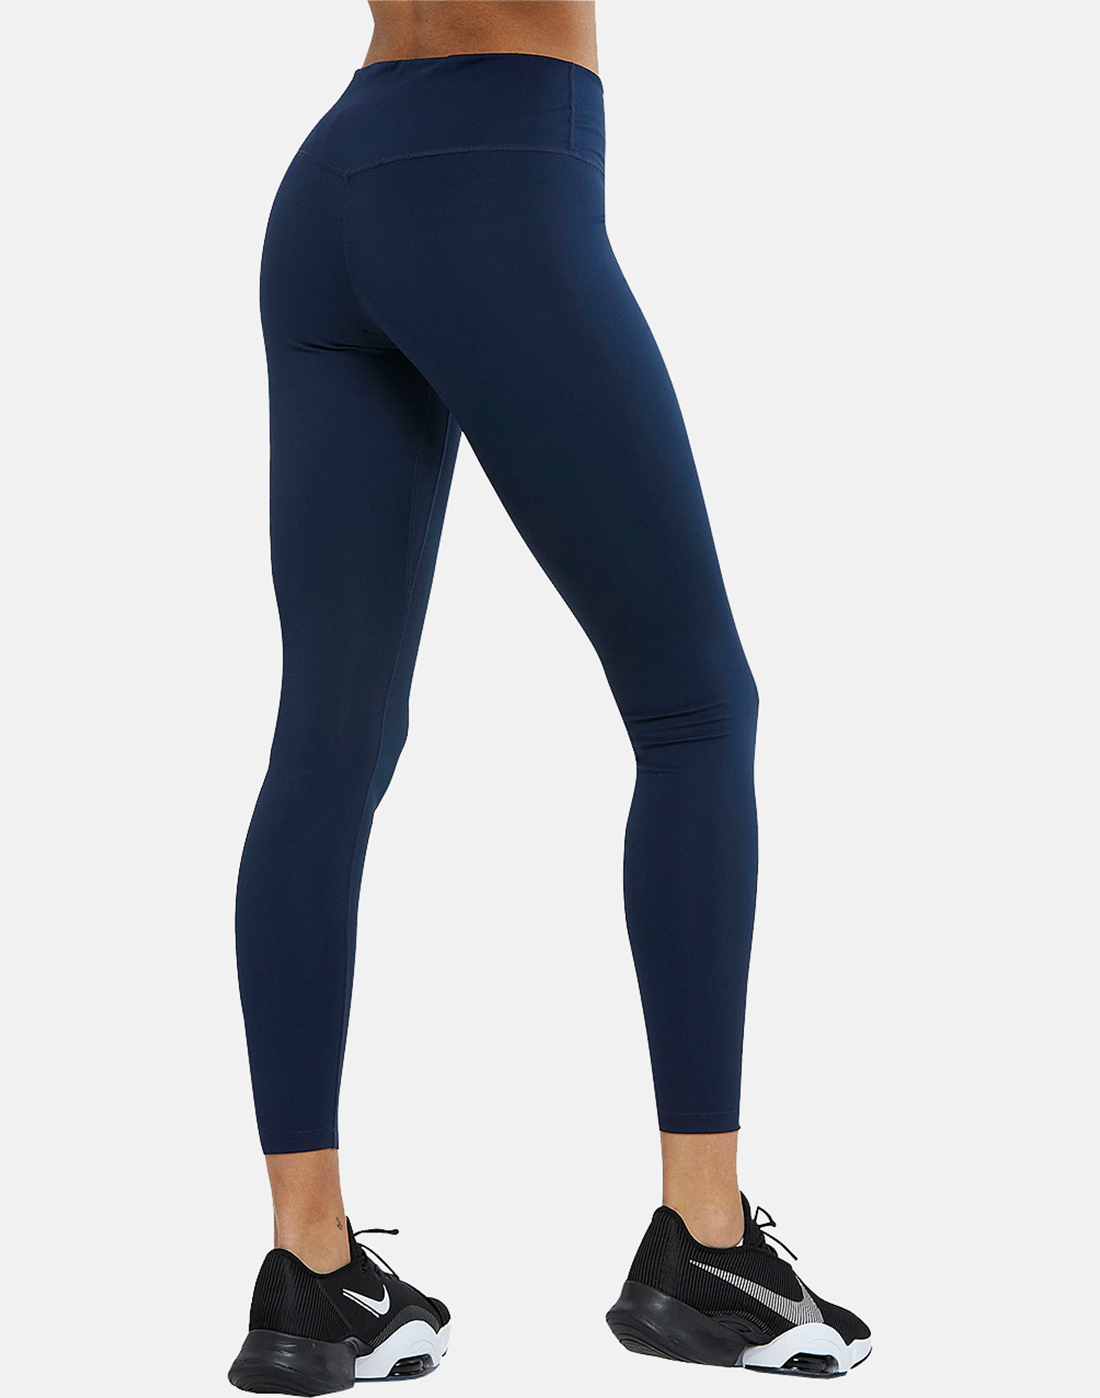 Nike Womens One Leggings - Navy | Life Style Sports IE